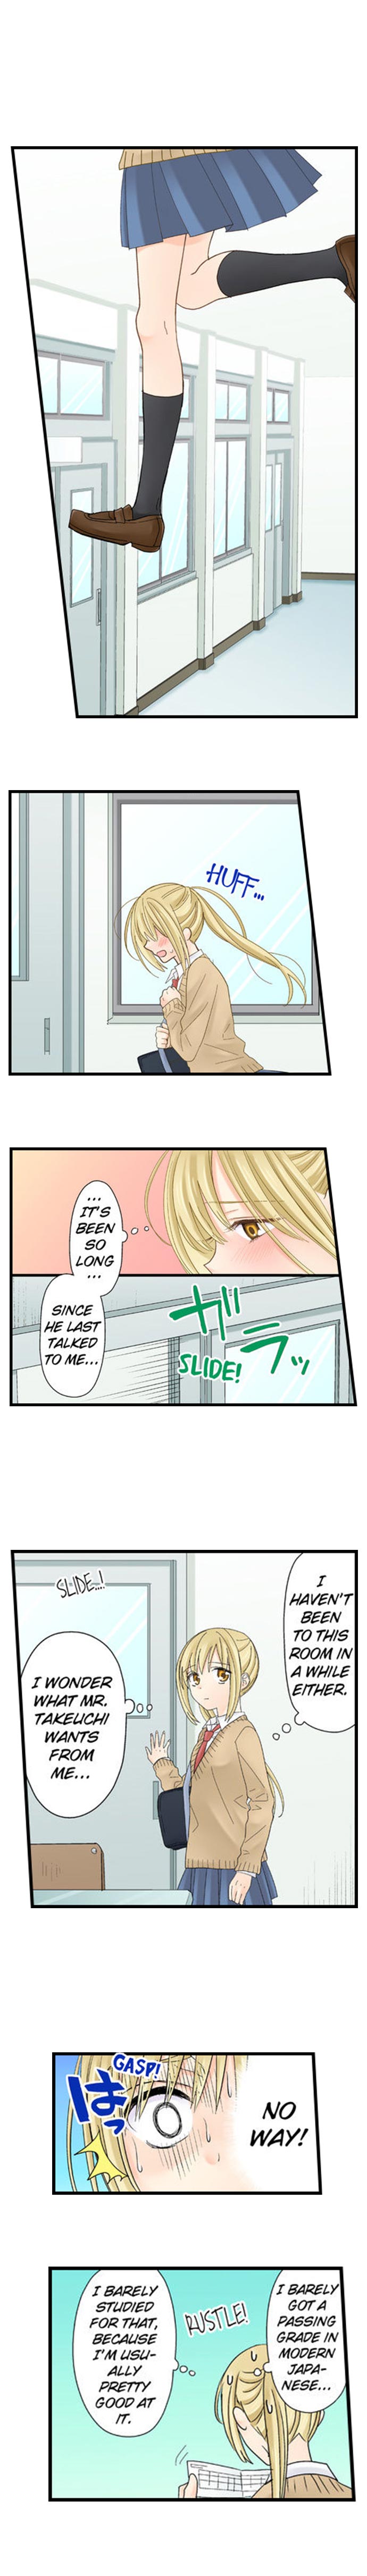 Running a Love Hotel with My Math Teacher - Chapter 15 Page 8